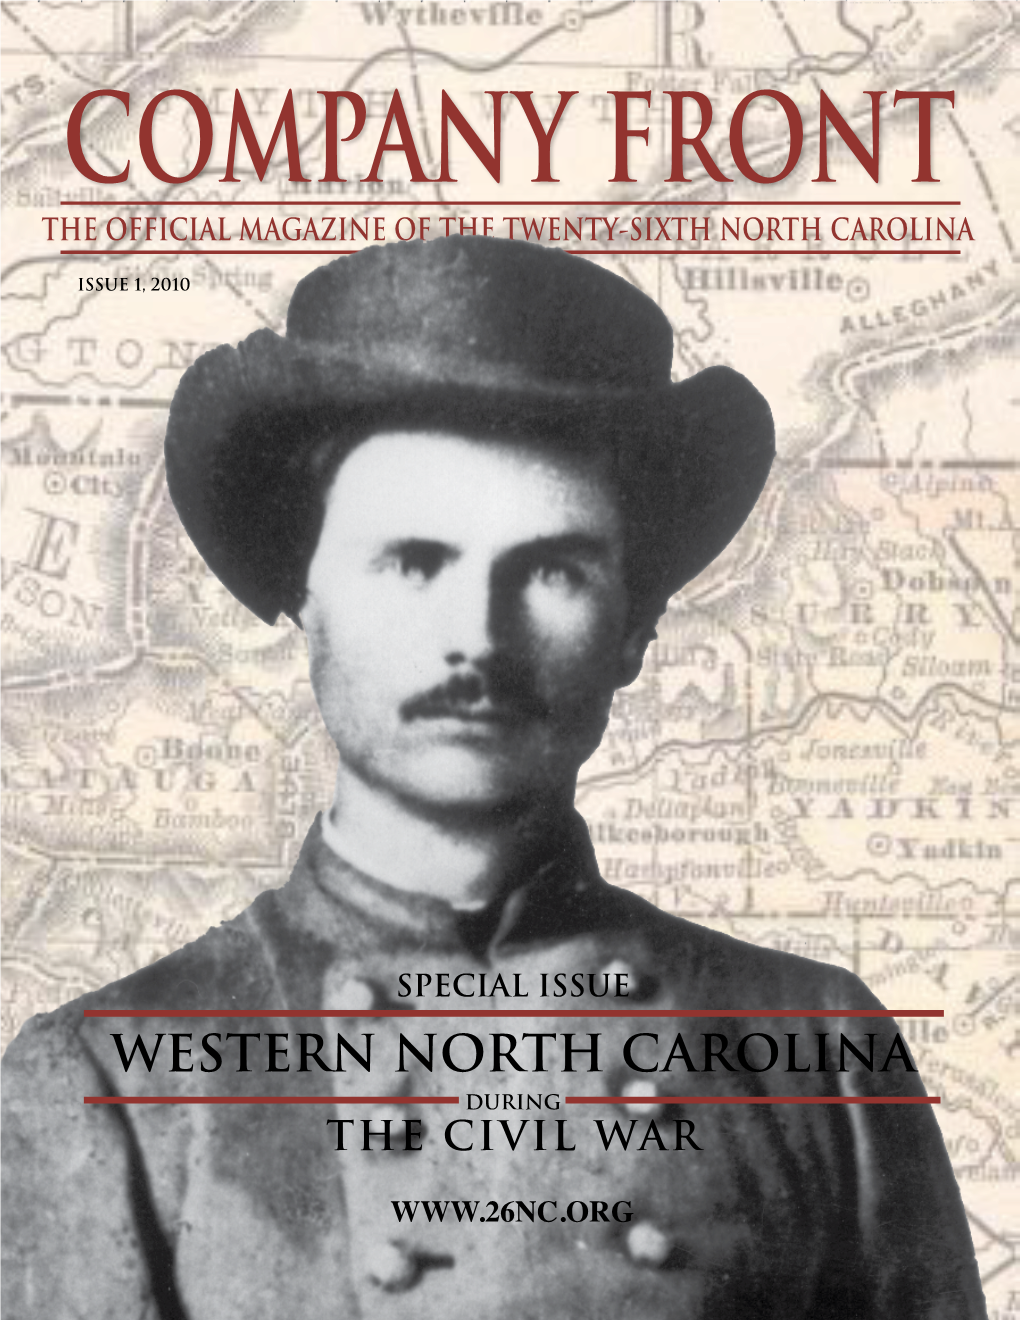 Company Front Issue 1, 2010  This Publication Is Printed for the Society for the Preservation of the 26Th Regiment North Carolina Troops, Inc